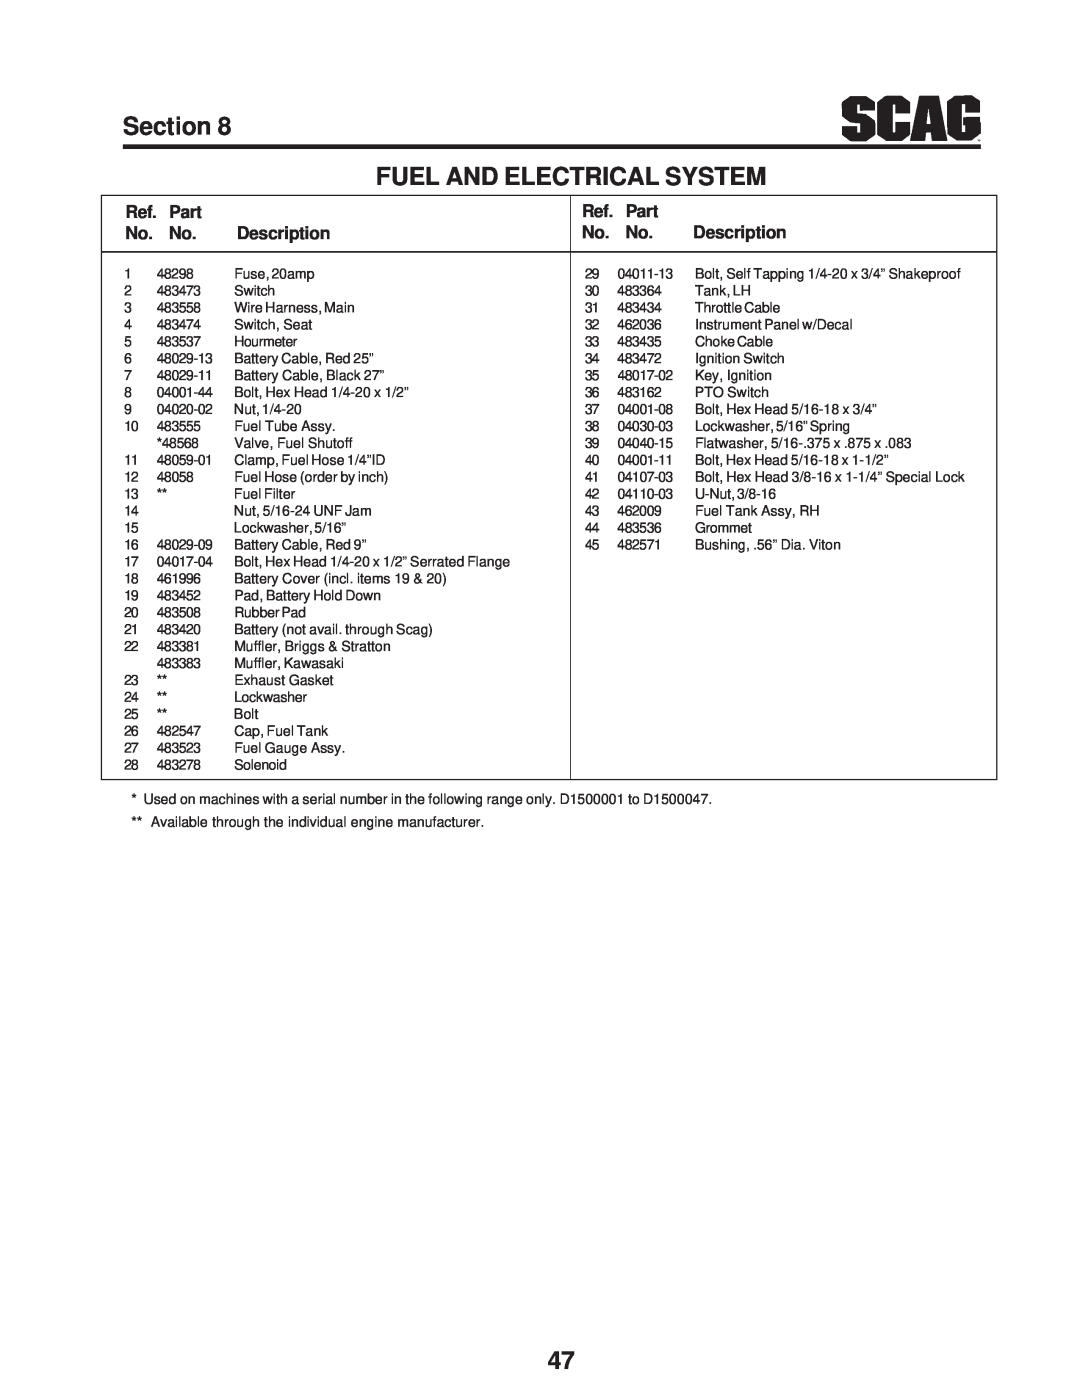 Scag Power Equipment SFZ manual Section FUEL AND ELECTRICAL SYSTEM, Ref. Part, Description 